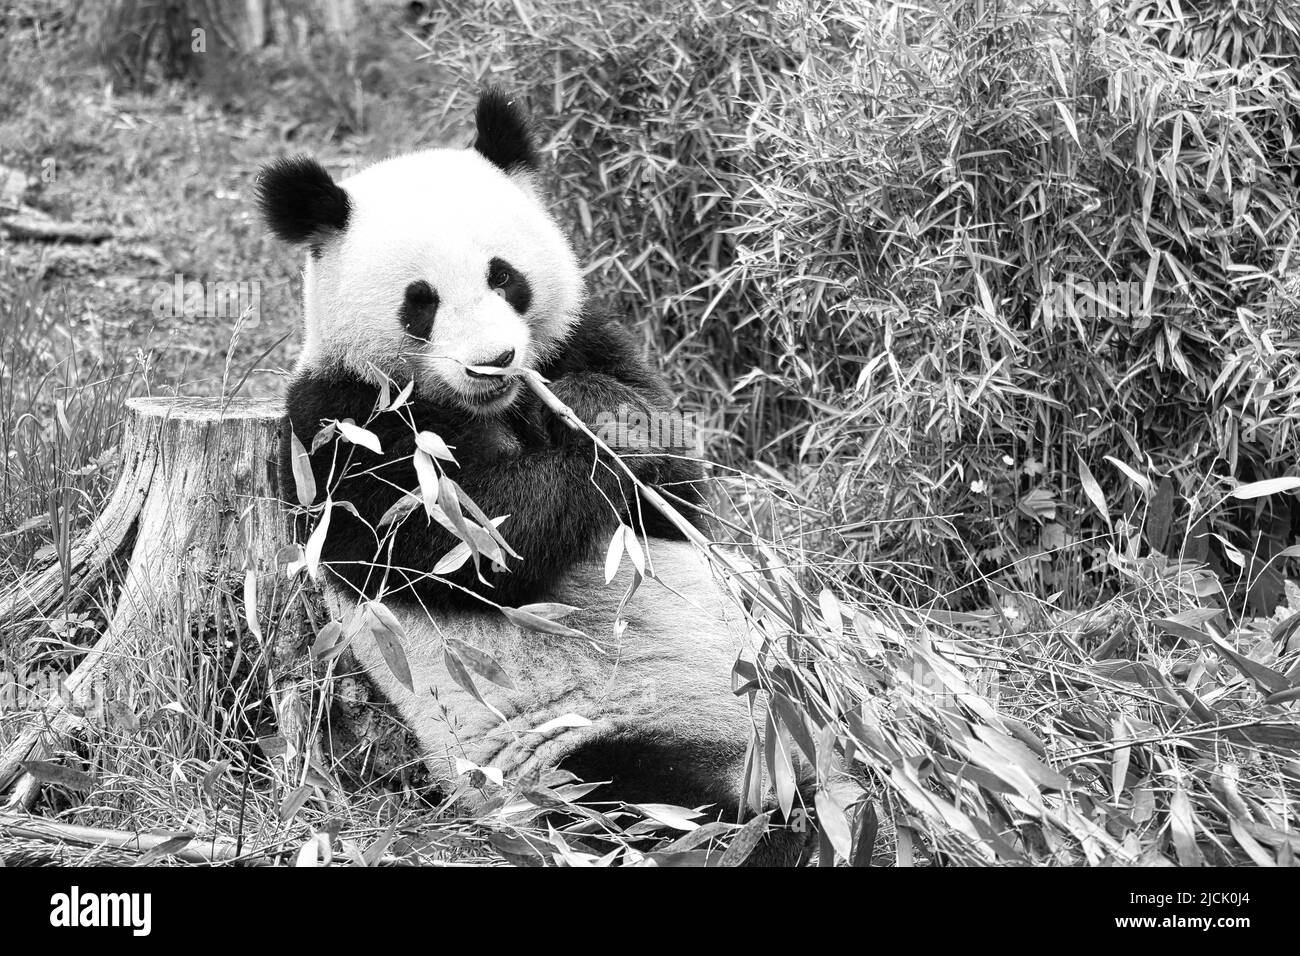 big panda in black and white, sitting eating bamboo. Endangered species. Black and white mammal that looks like a teddy bear. Deep photo of a rare bea Stock Photo